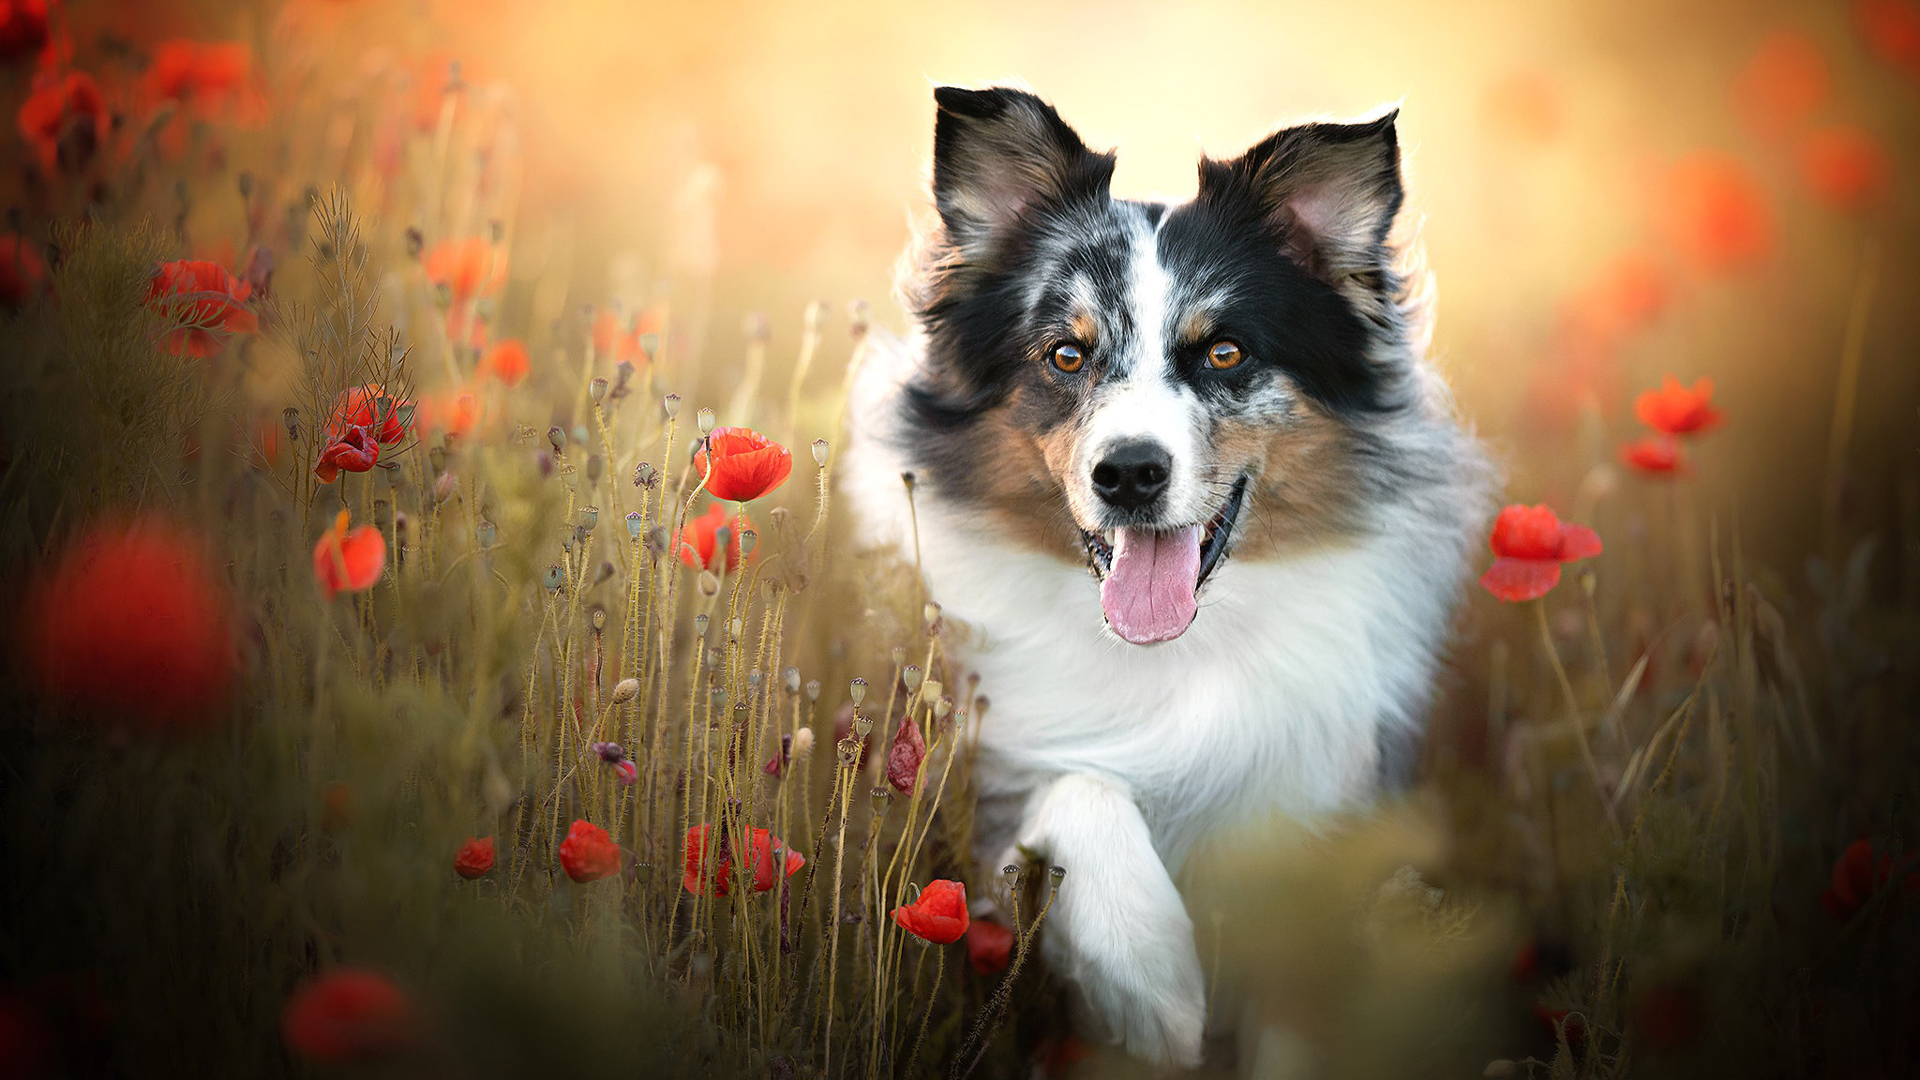 Black White Border Collie In Red Common Poppy Flowers Field HD Dog